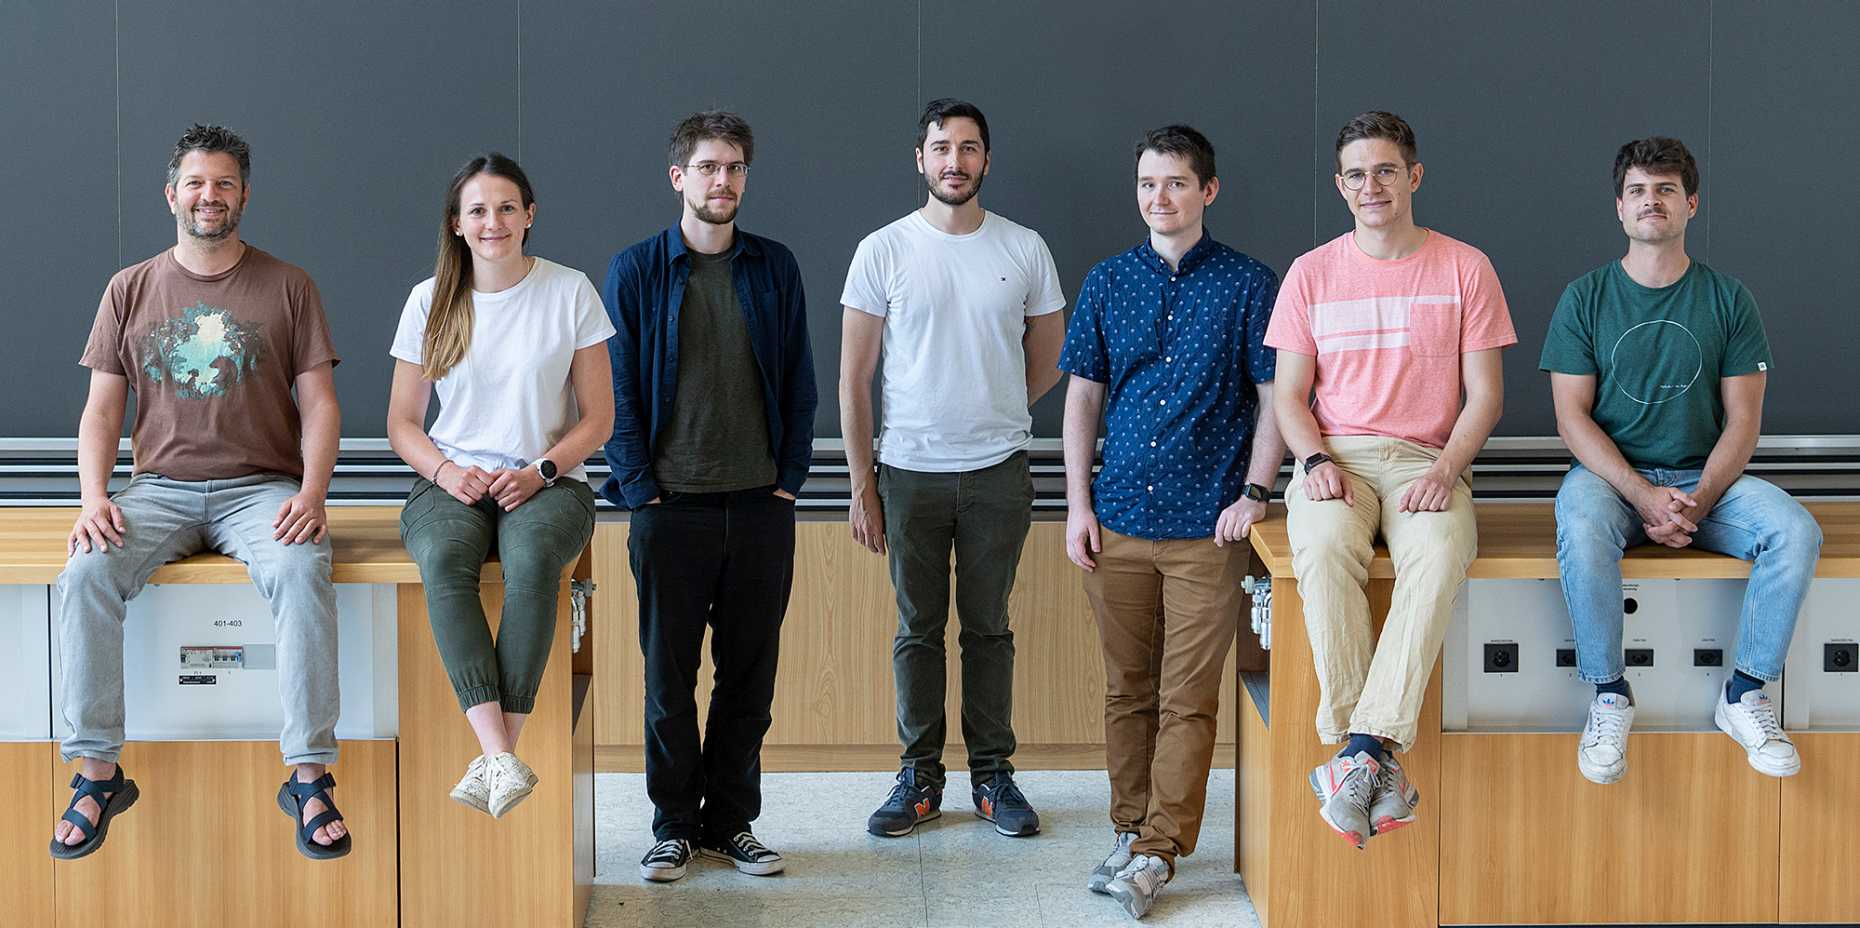 Team spirit also in the lecture hall: Oded Zilberberg, Lidia Stocker, Jan Kosata, Javier del Pino, Tobias Wolf, Toni Heugel, Christian Carisch (f.l.t.r) and absent on this day: Andishe Khedri and Anina Leuch. (Photo: ETH Zurich, Heidi Hostettler)